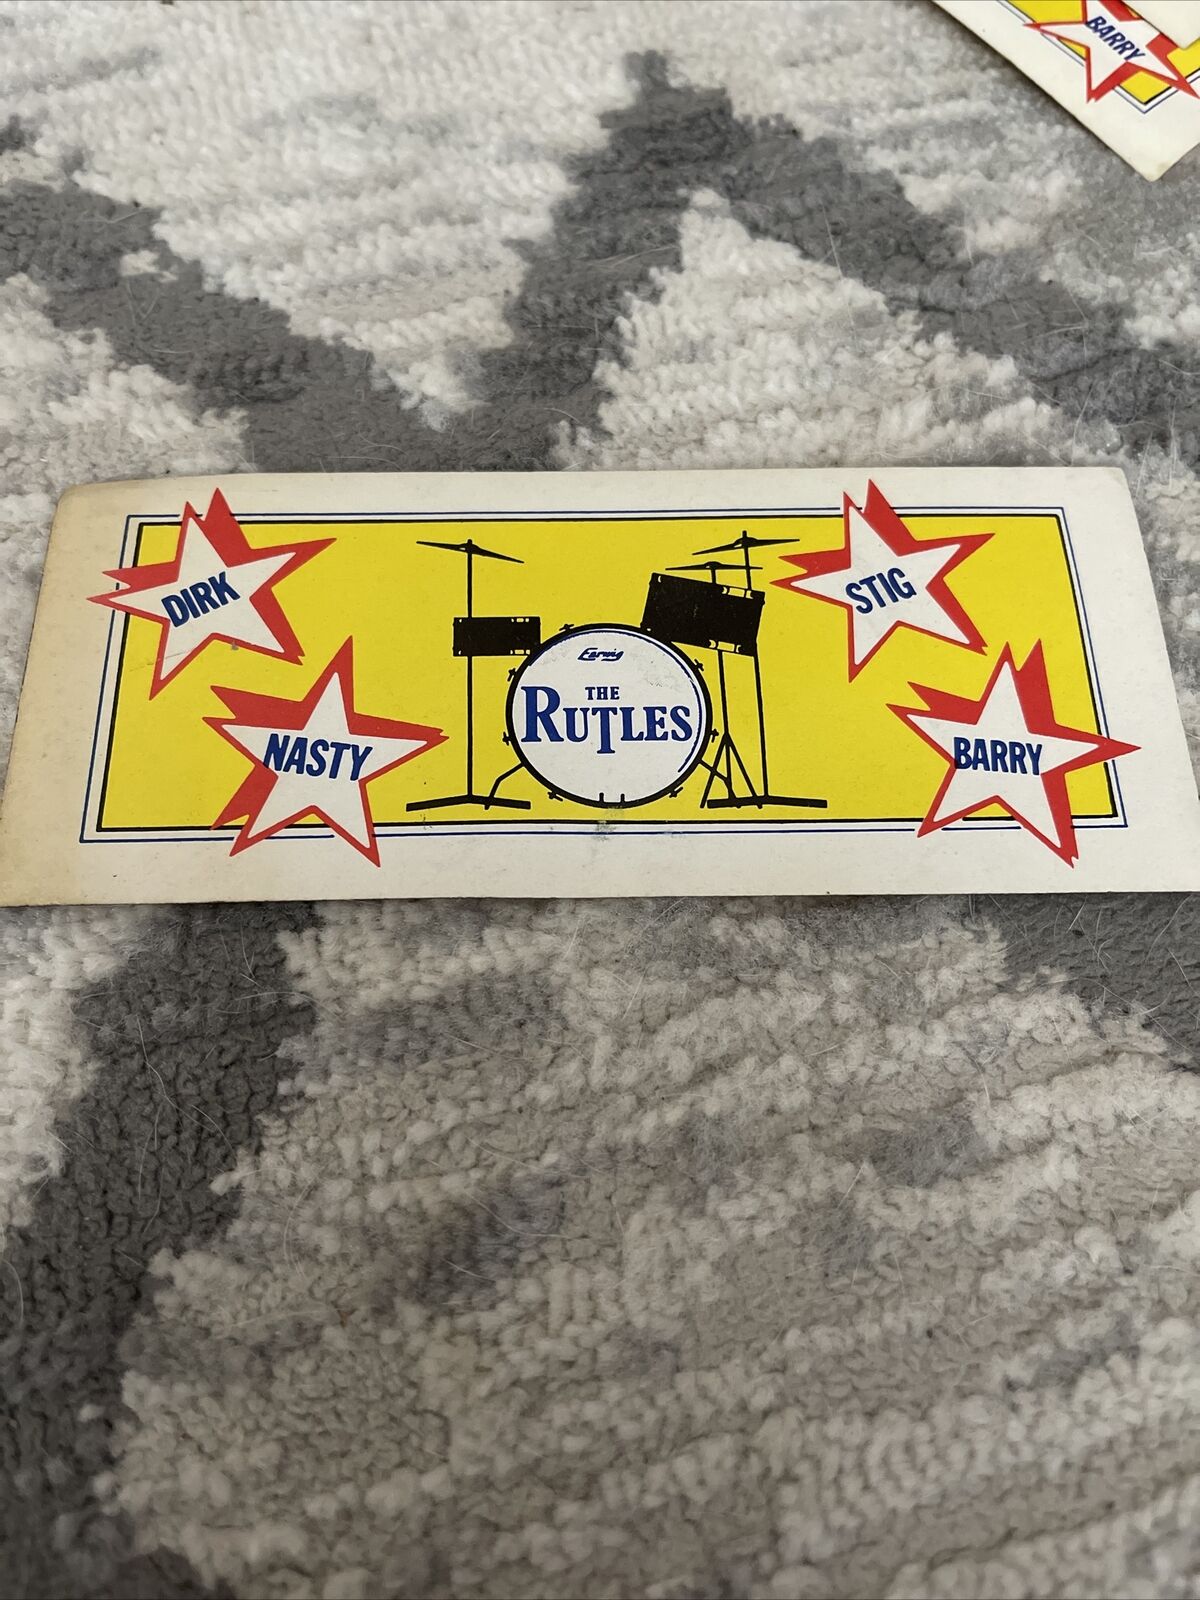 The Rutles soundtrack Record Store Hype Sticker Beatles Spoof 1970s Original 7”